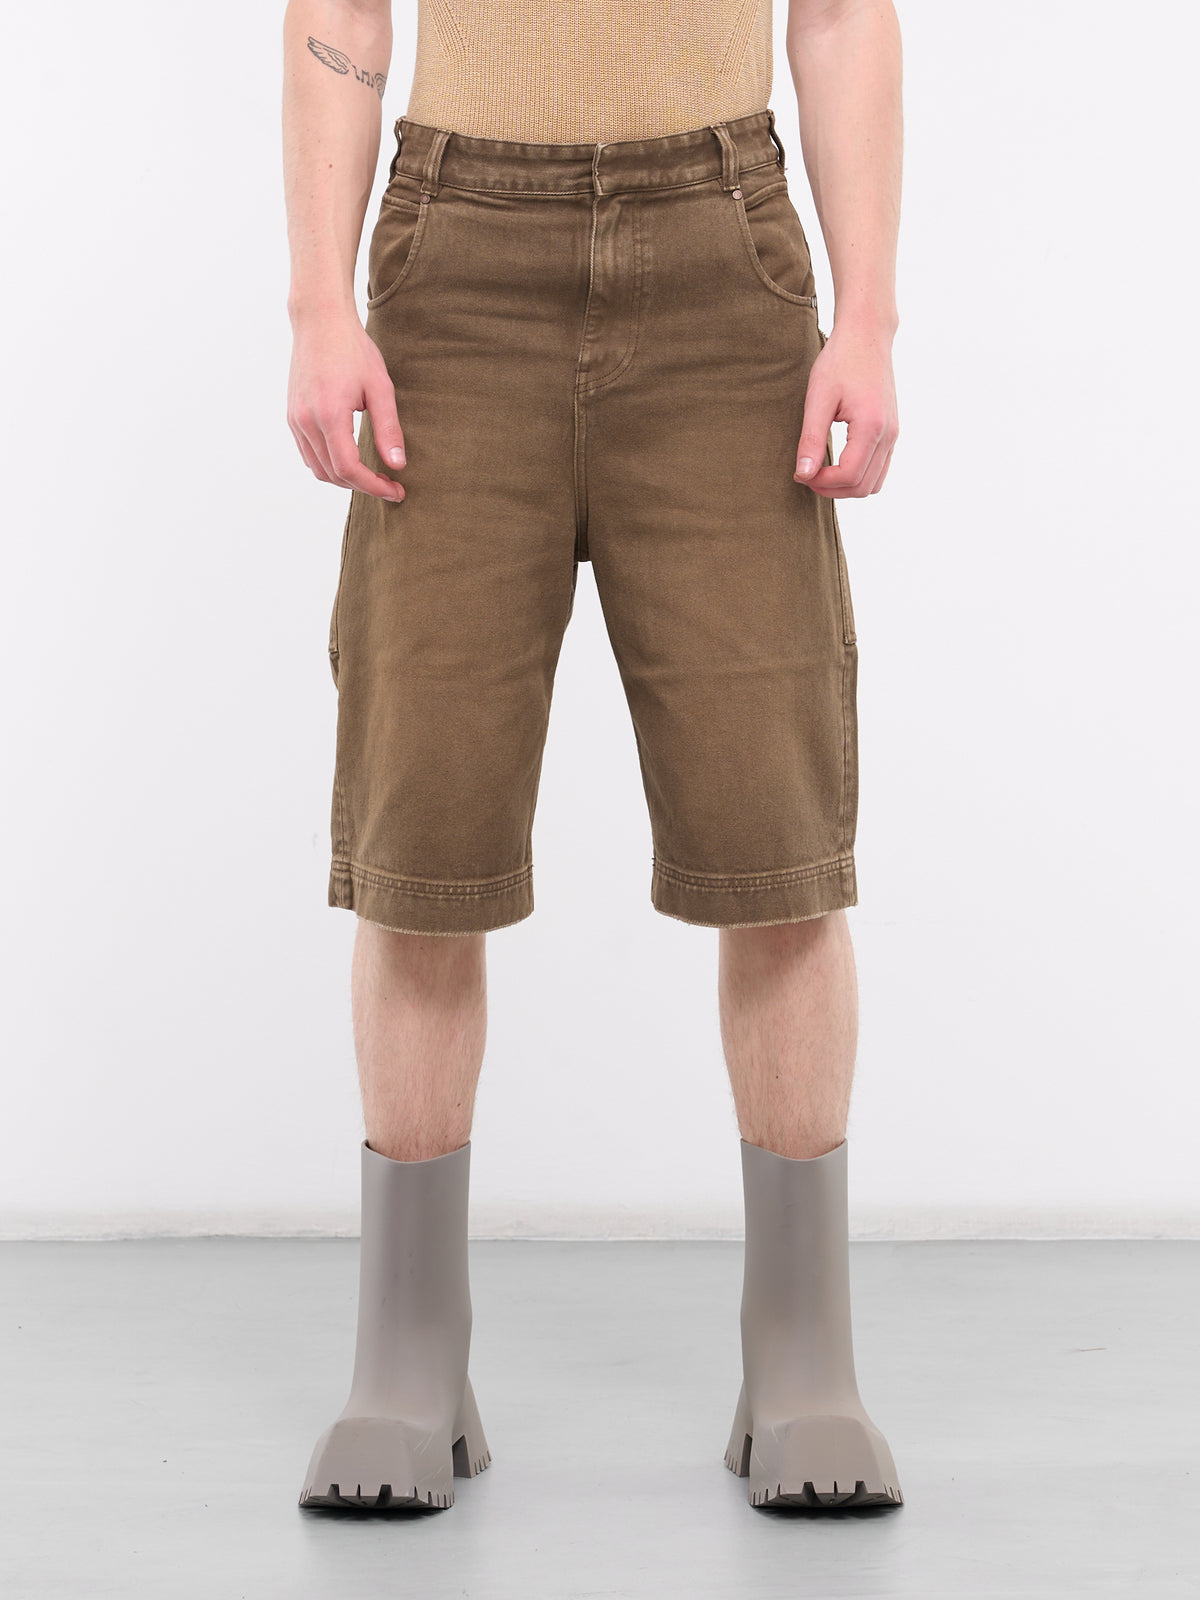 D-Shorts (ES2570MS-MILITARY-STONE)